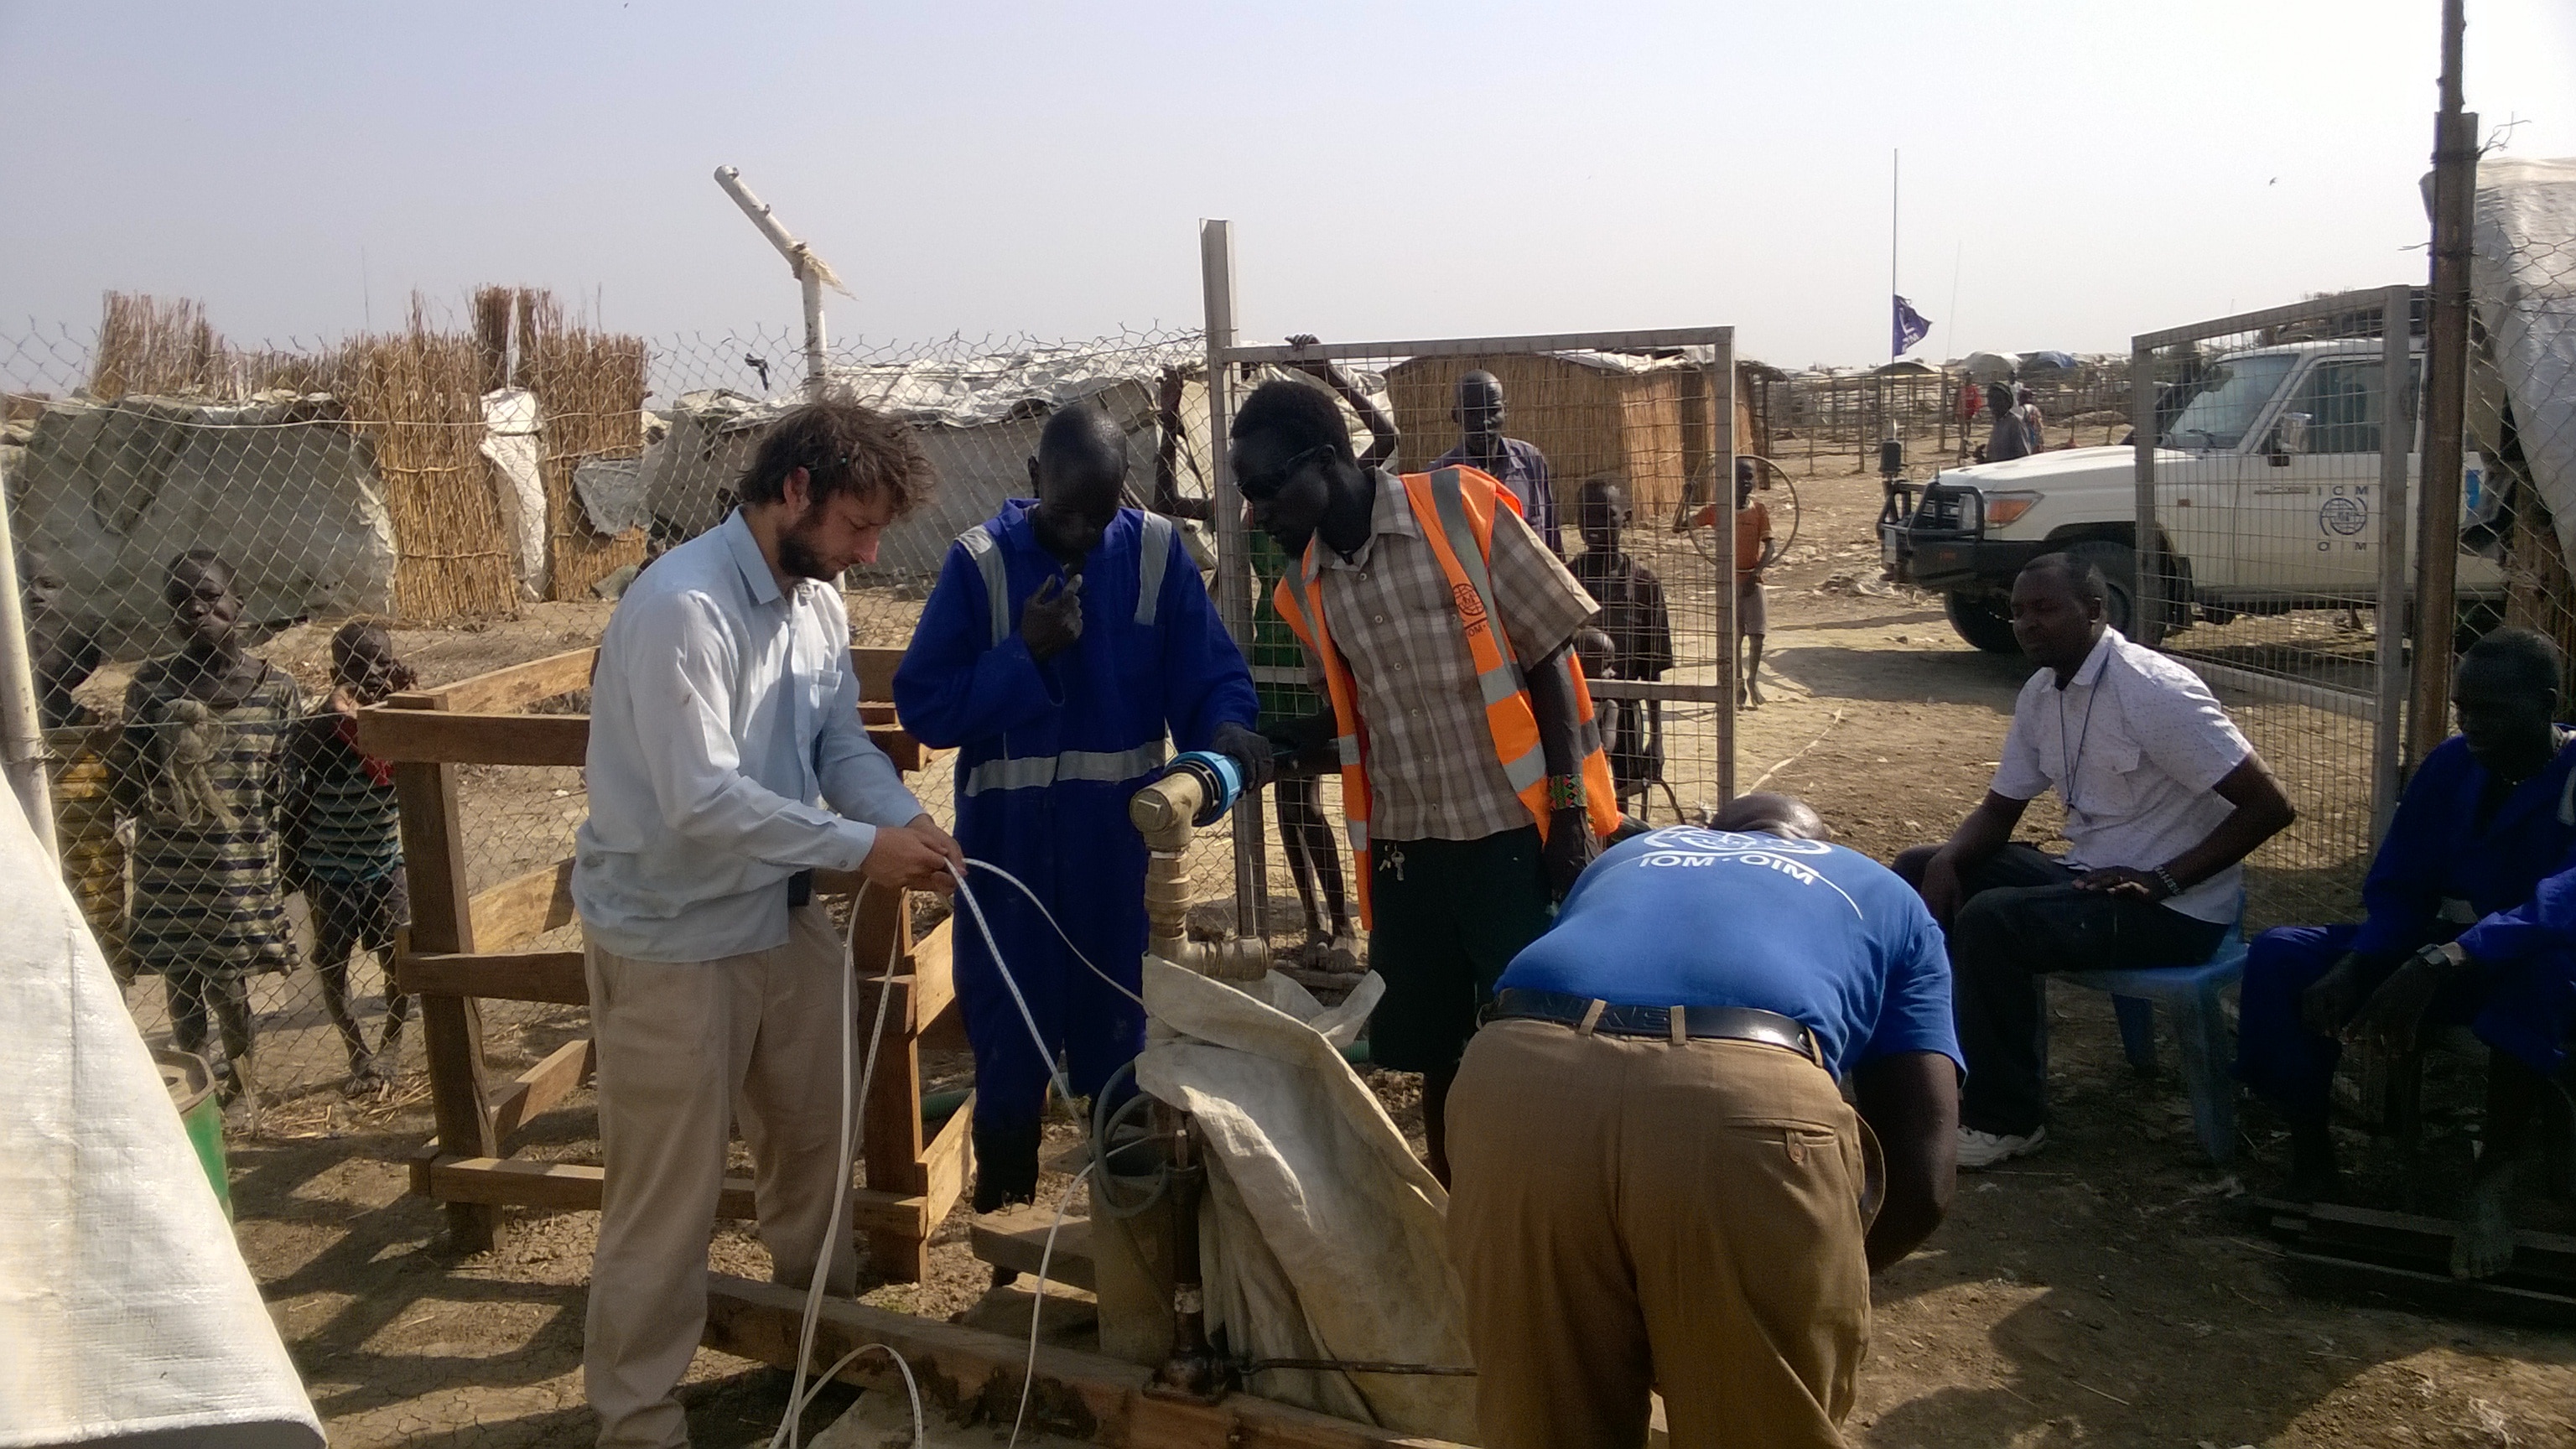 Capacity building hydrogeology skills in refugee camps